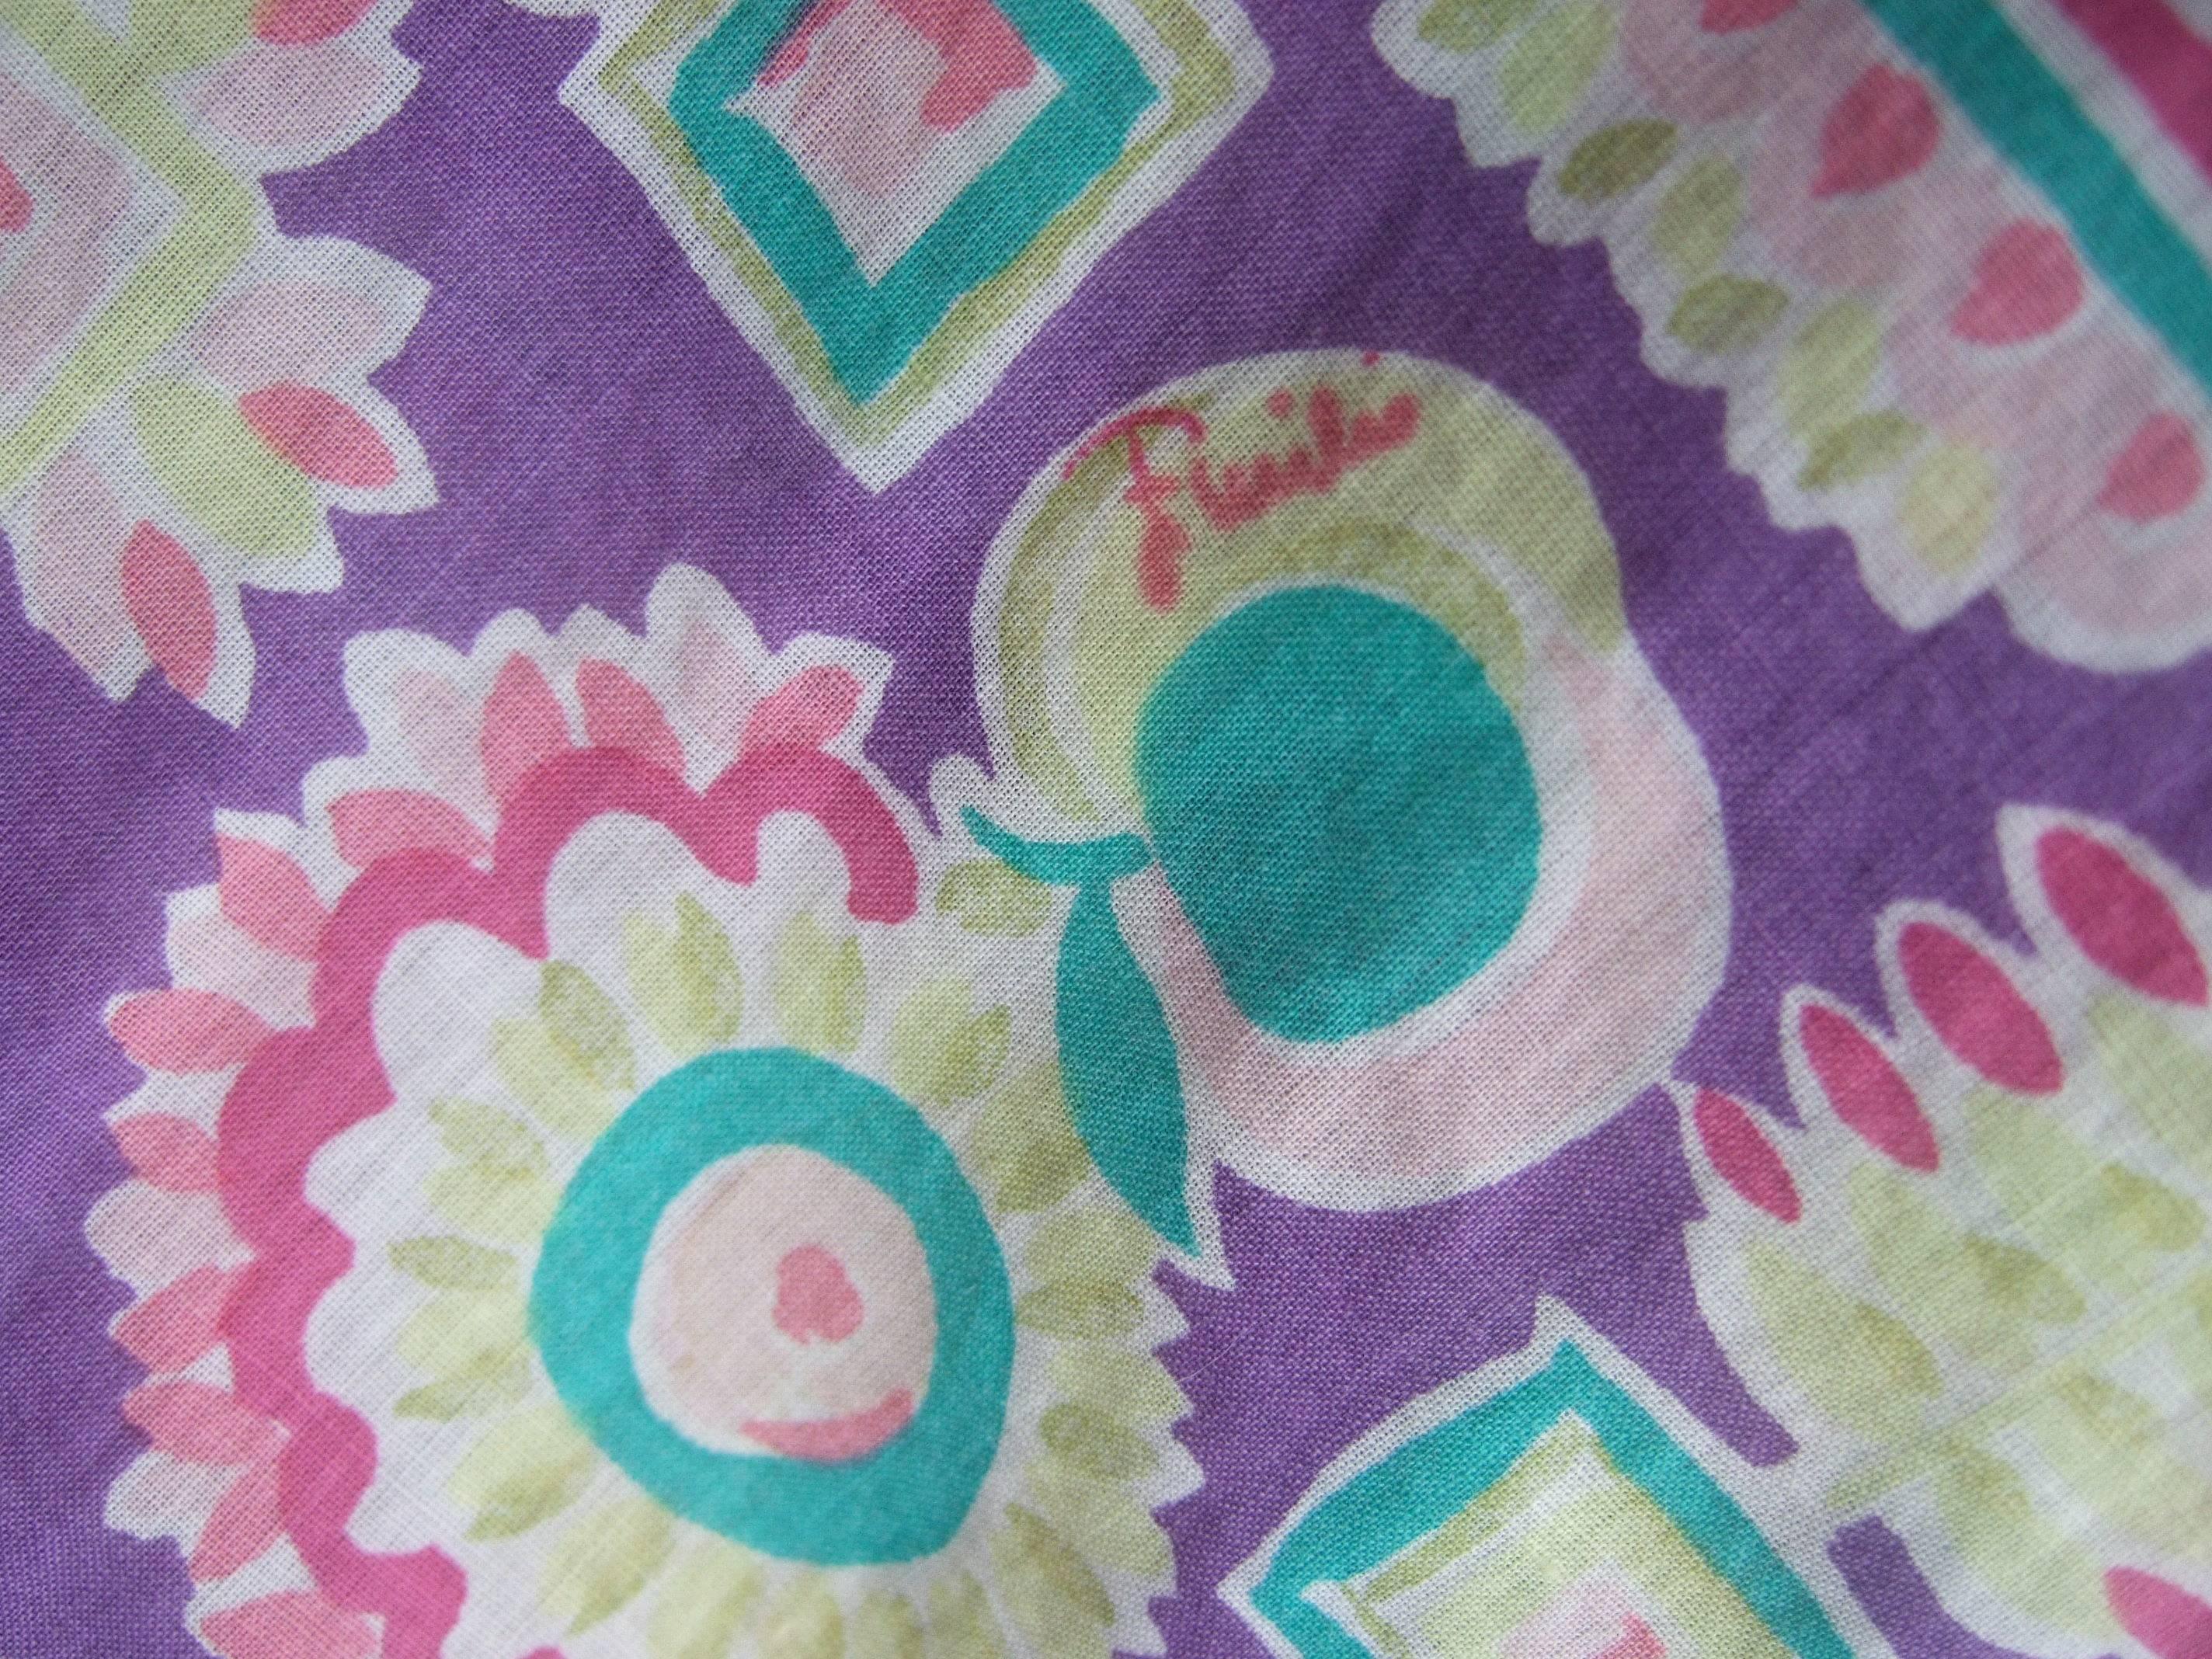 Emilio Pucci Cotton Pastel Print Blouse Made in Italy c 1970 In Good Condition For Sale In University City, MO